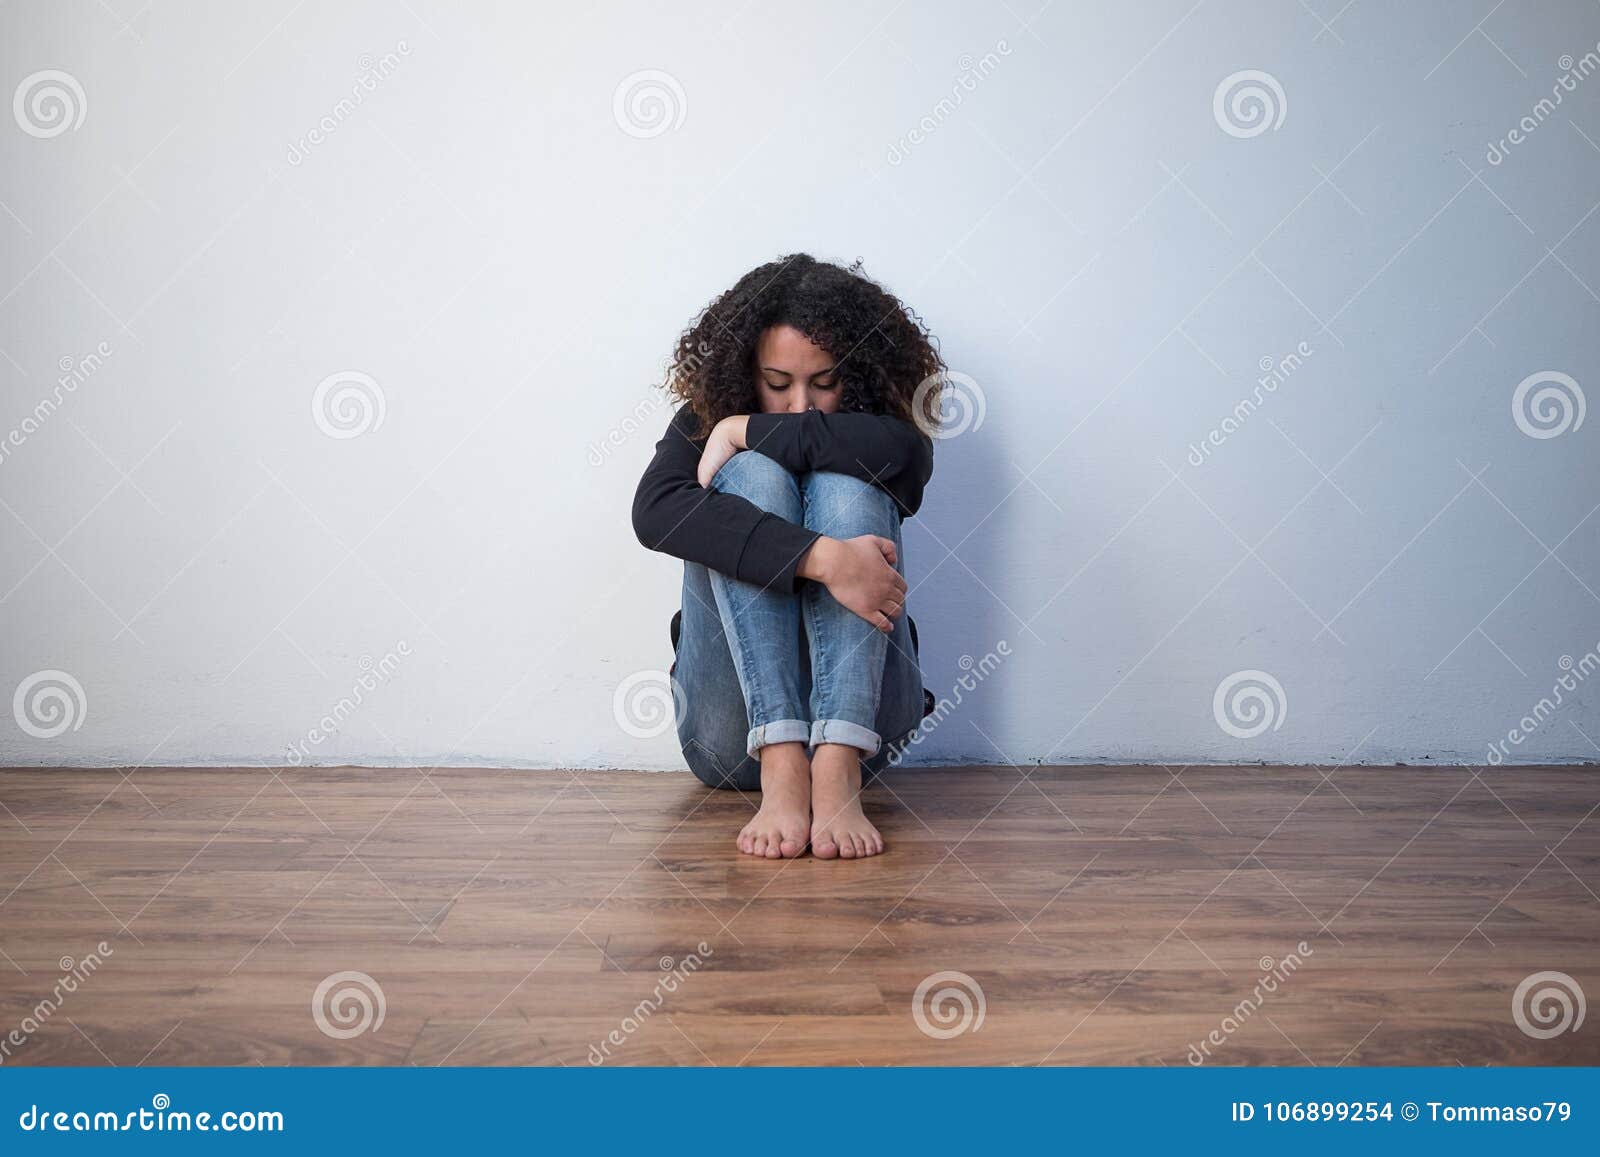 Sad and Lonely Black Girl Feeling Alone Stock Photo - Image of ...